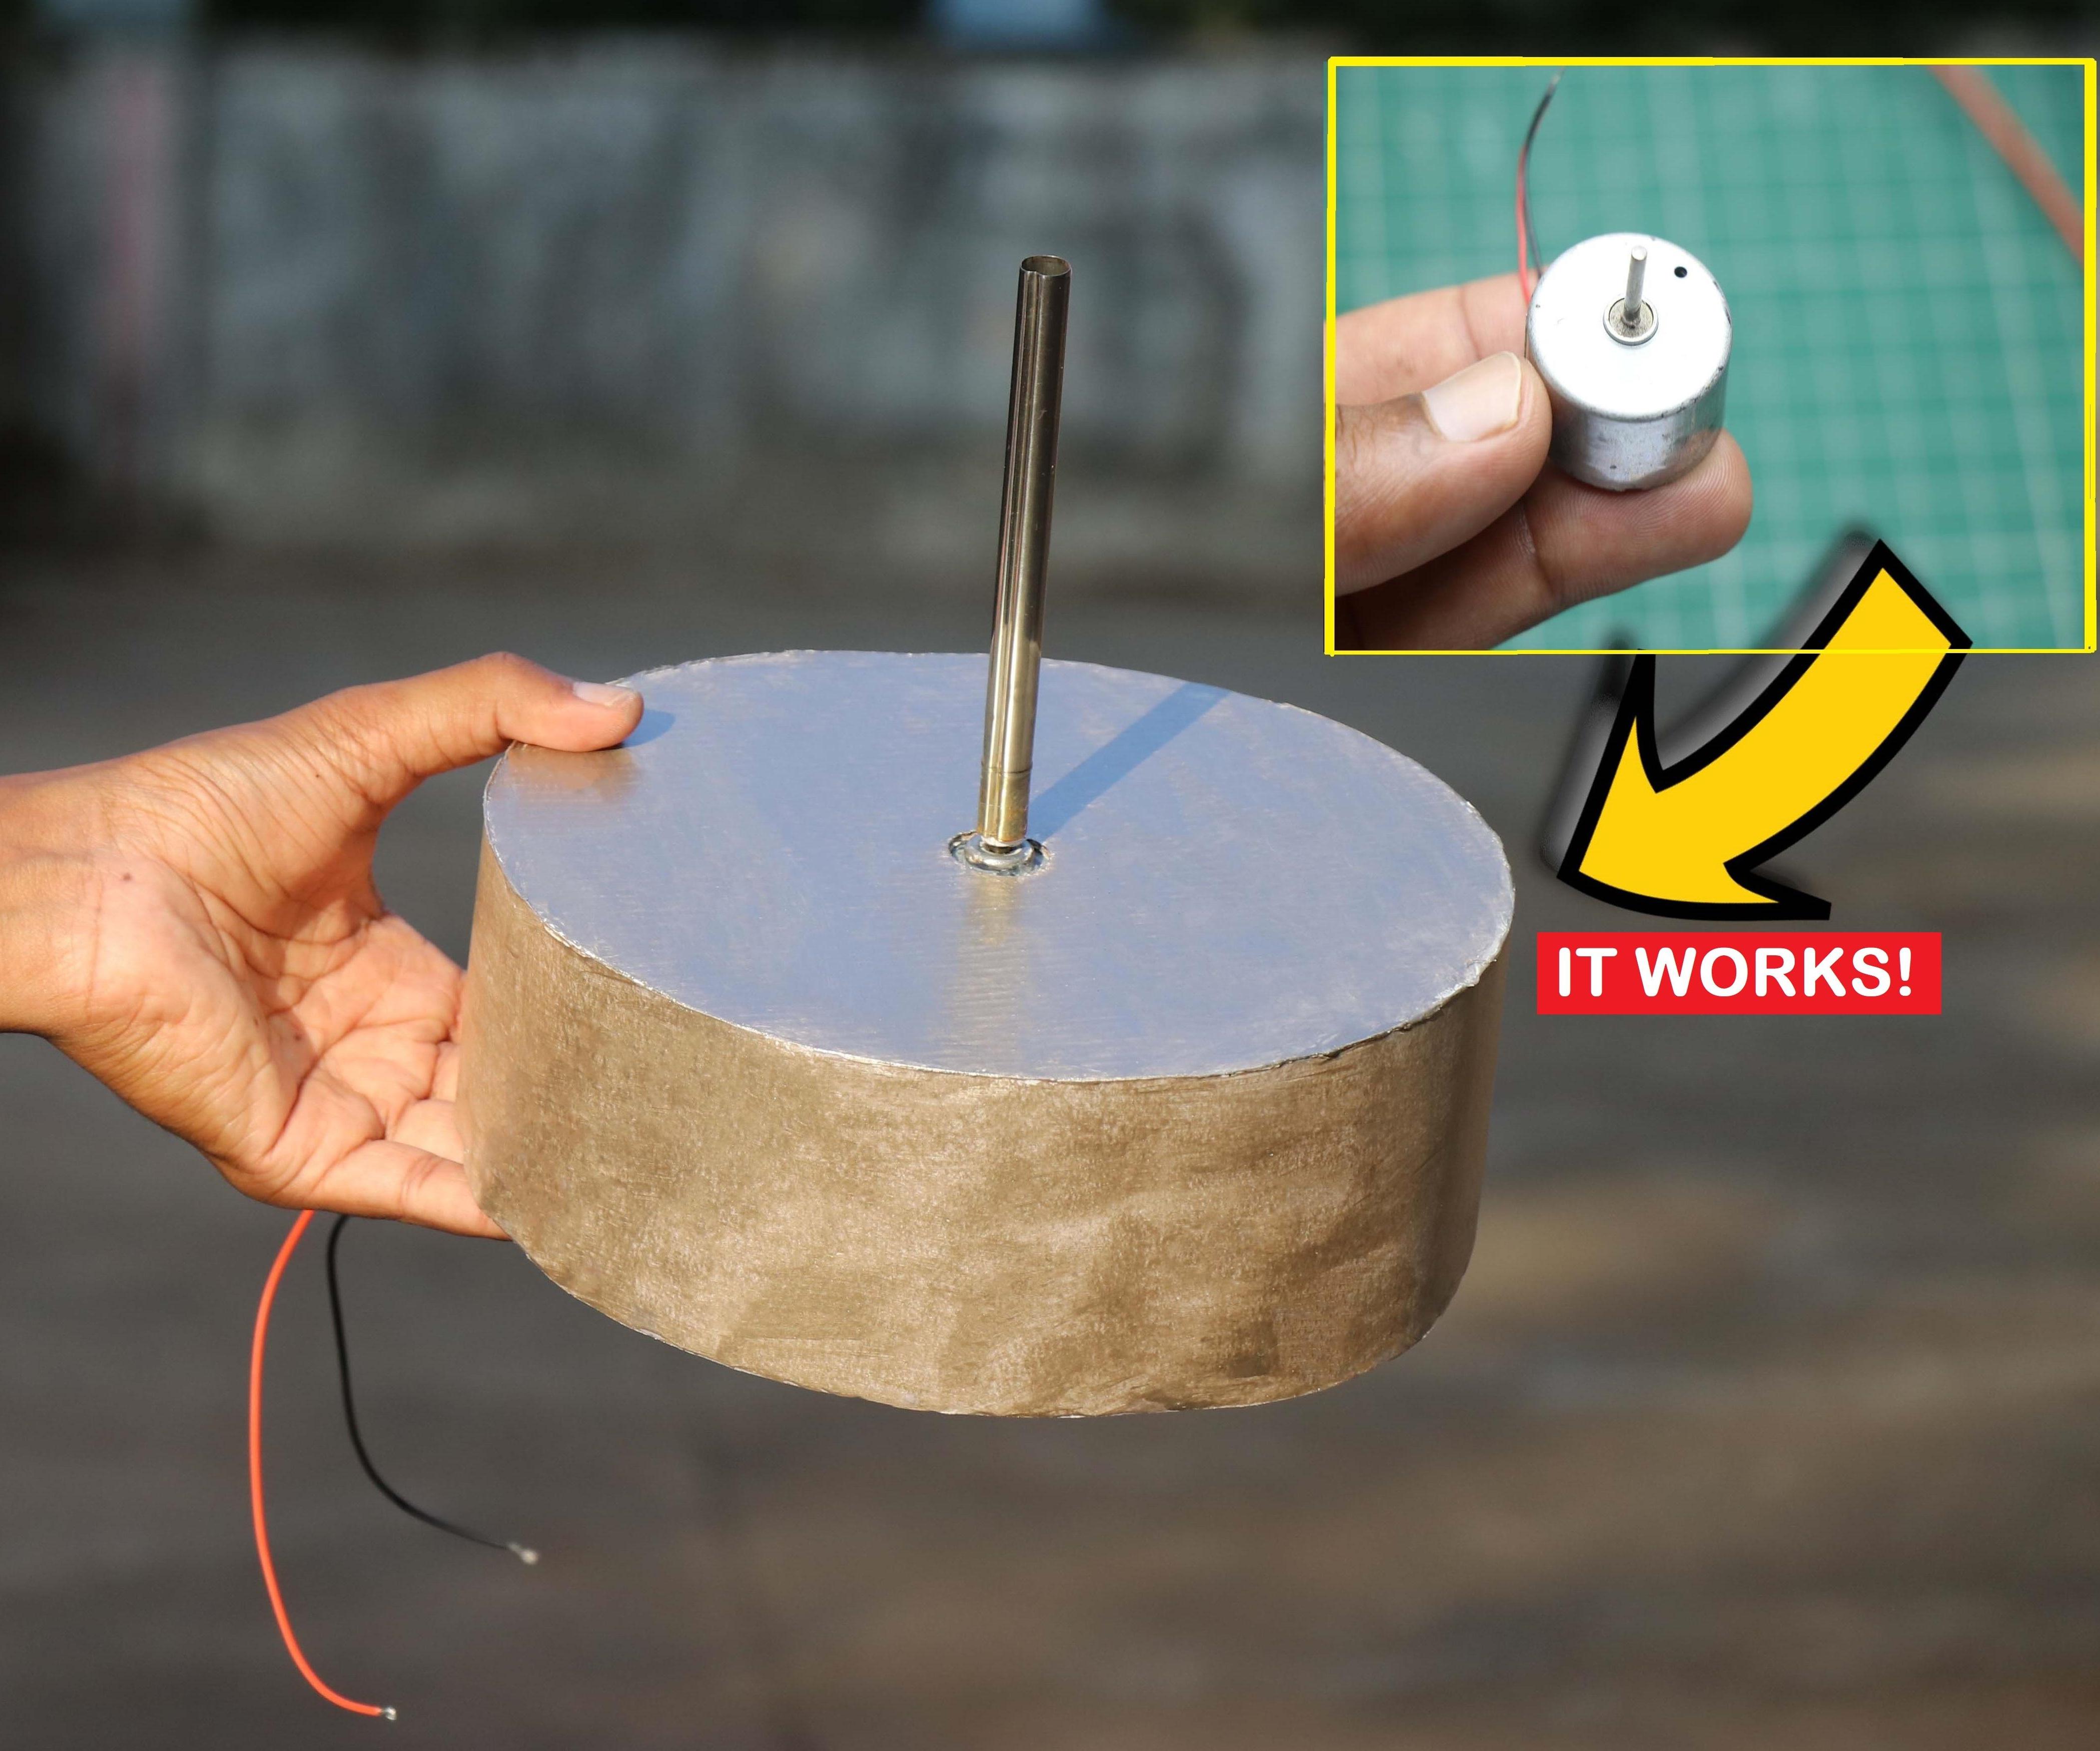 How to Build a Big DC Motor From Cardboard and Paper That Works